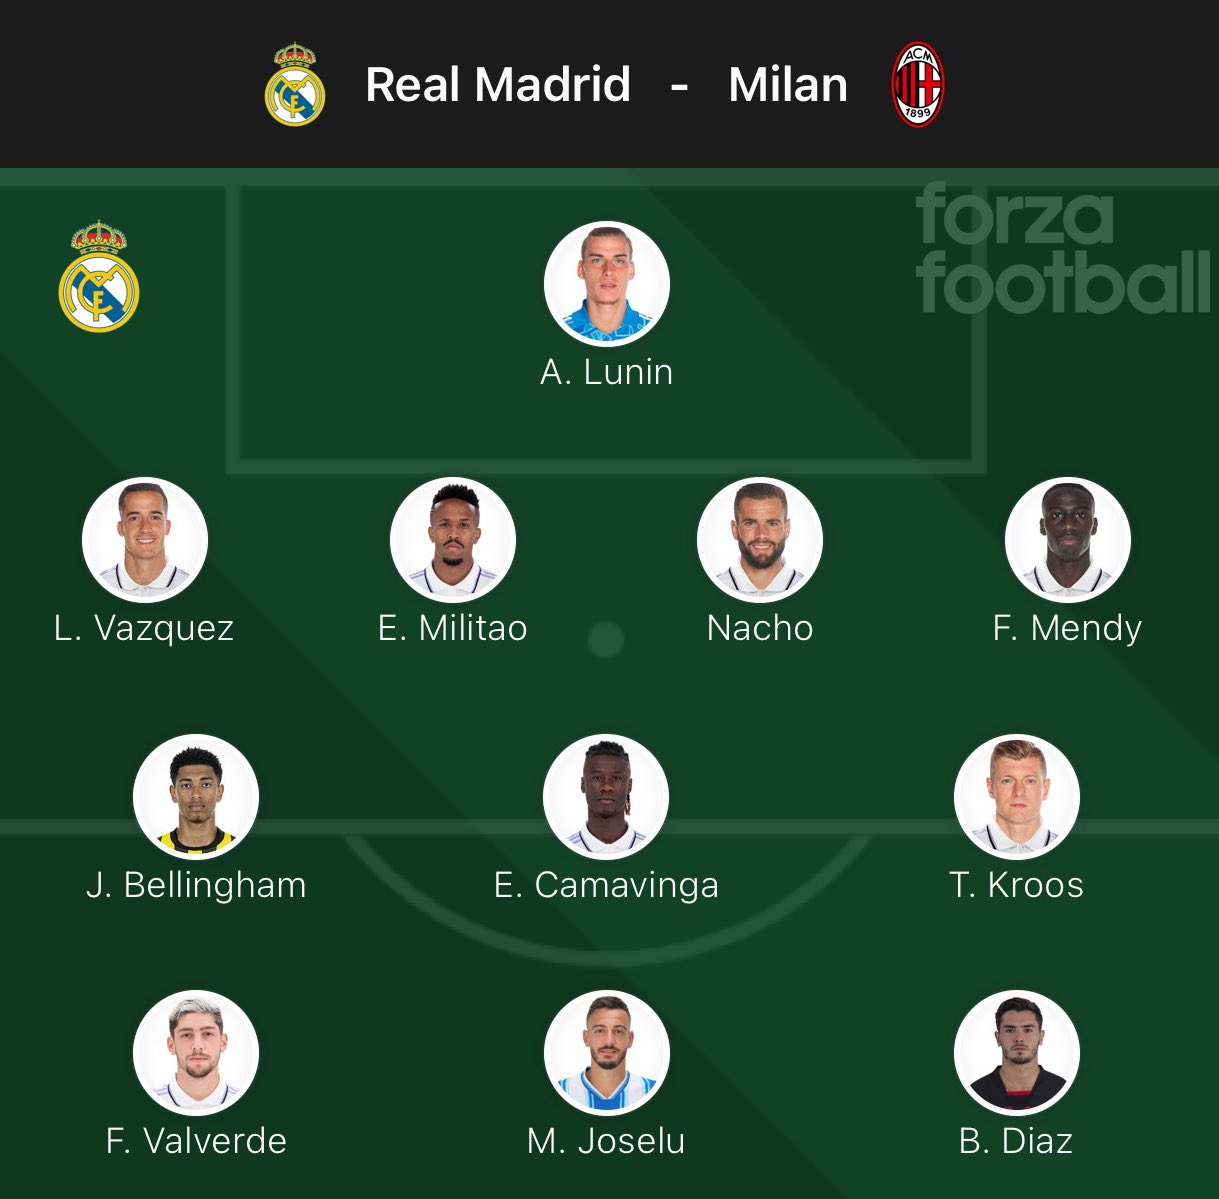 Once inicial real madrid hoy